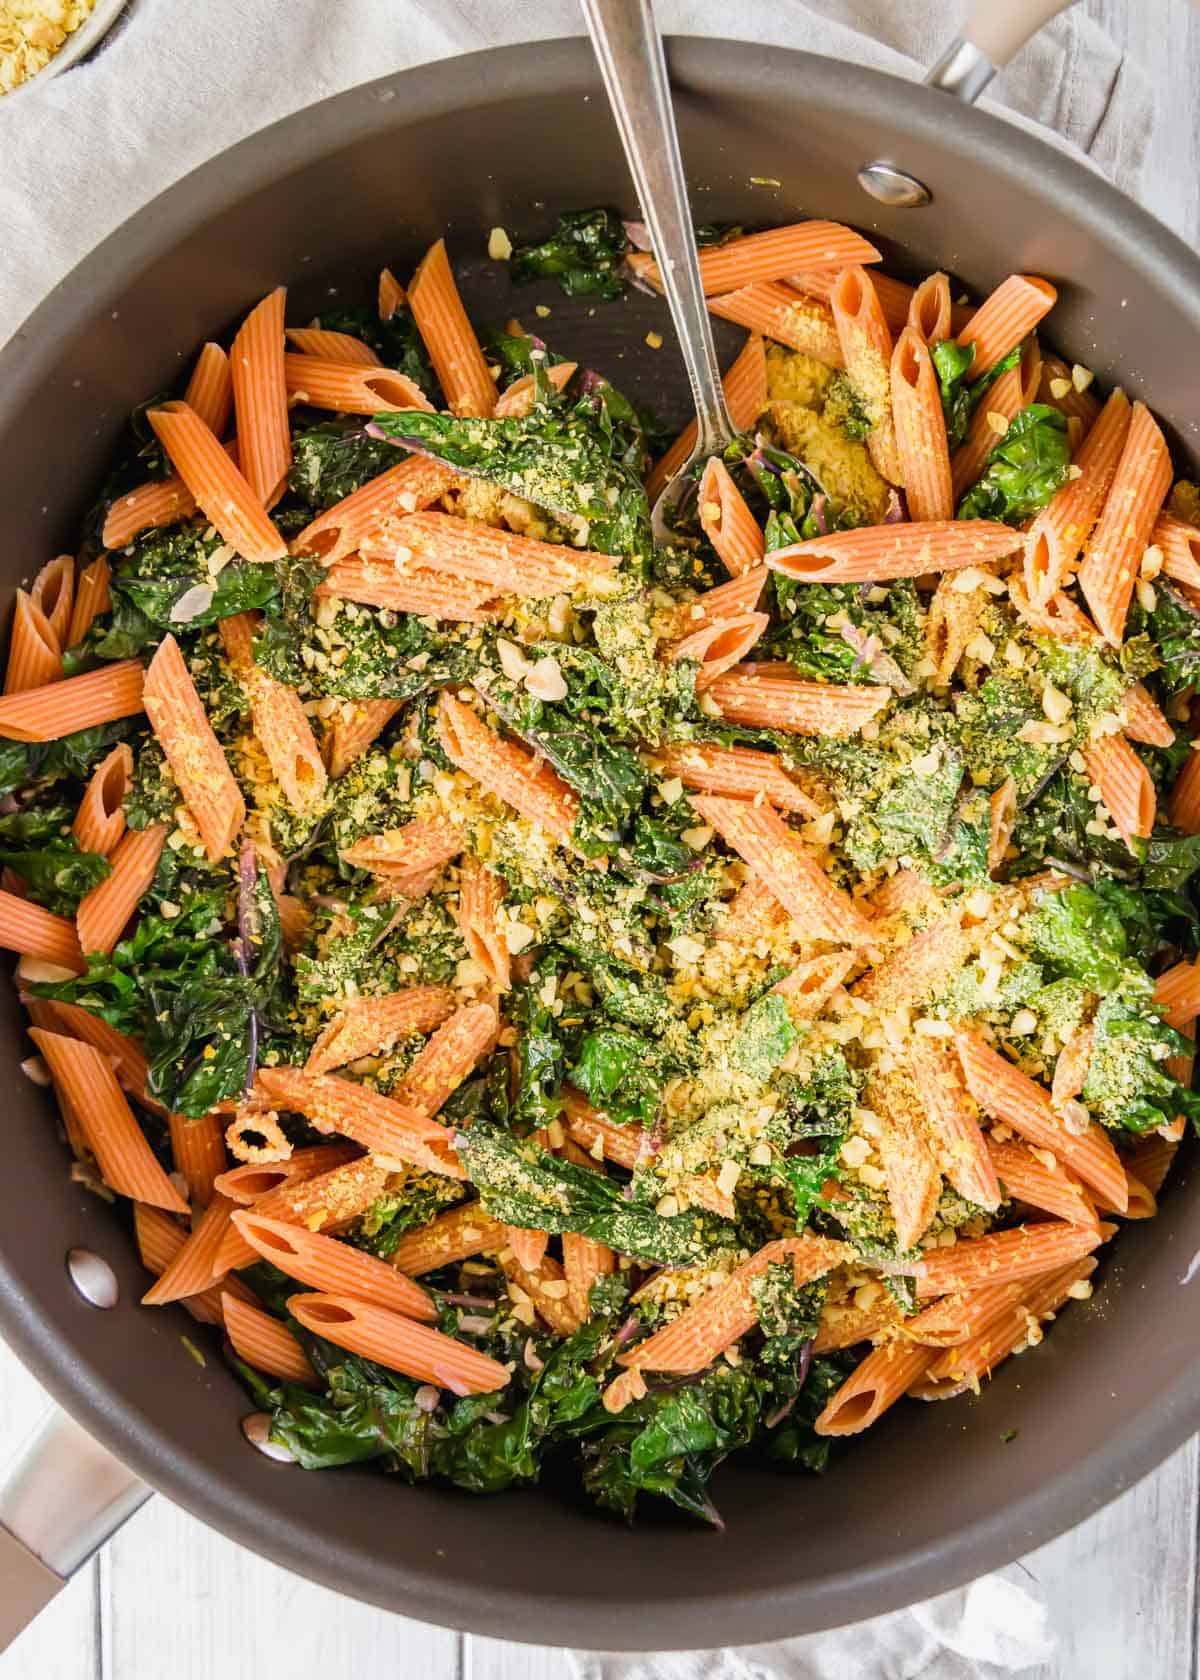 An easy pasta dinner that uses red lentil penne pasta for a gluten-free alternative.